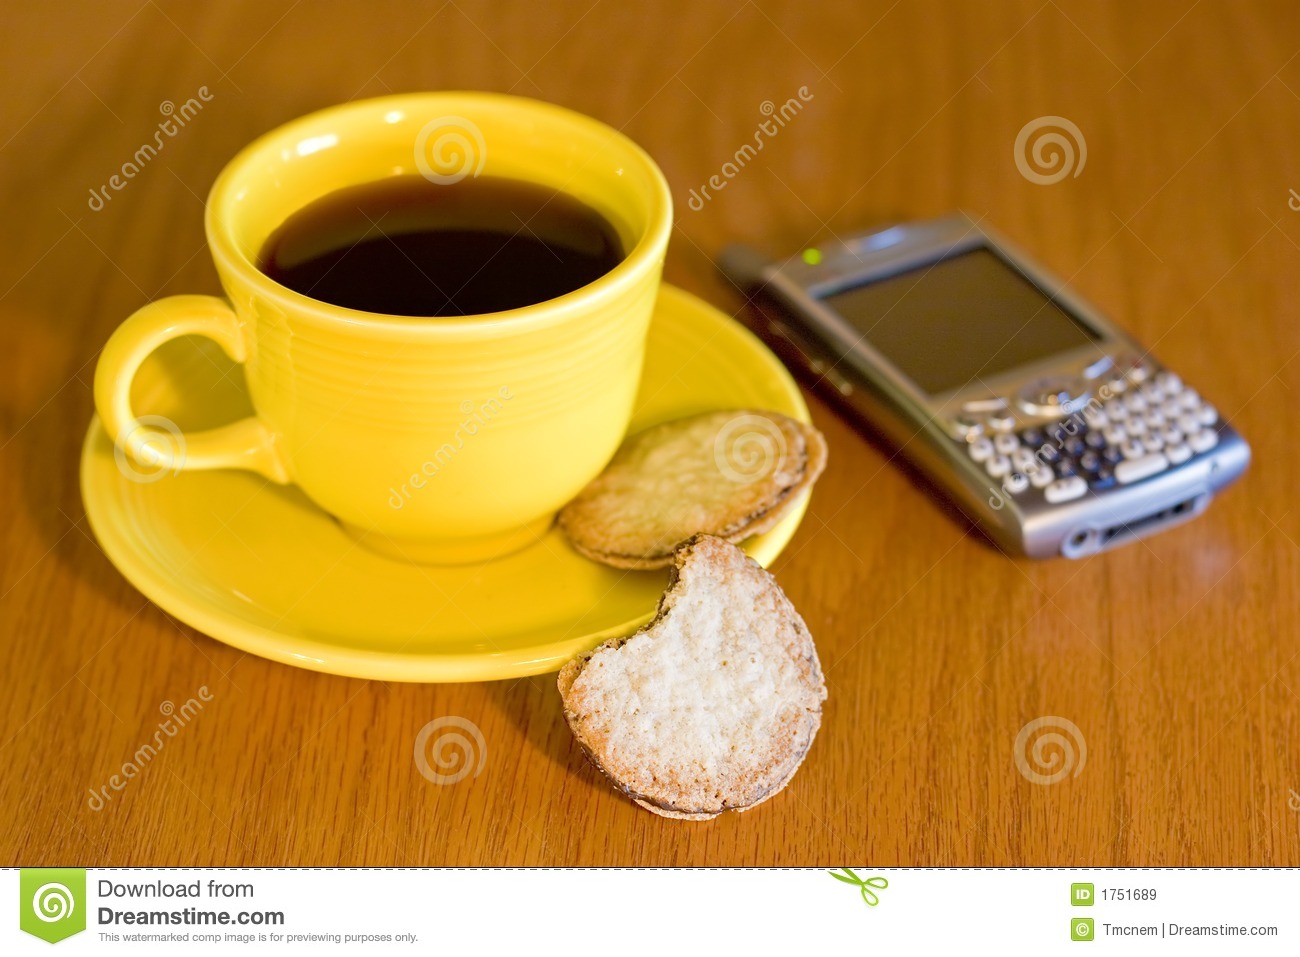 Tea And Cookies Royalty Free Stock Images   Image  1751689